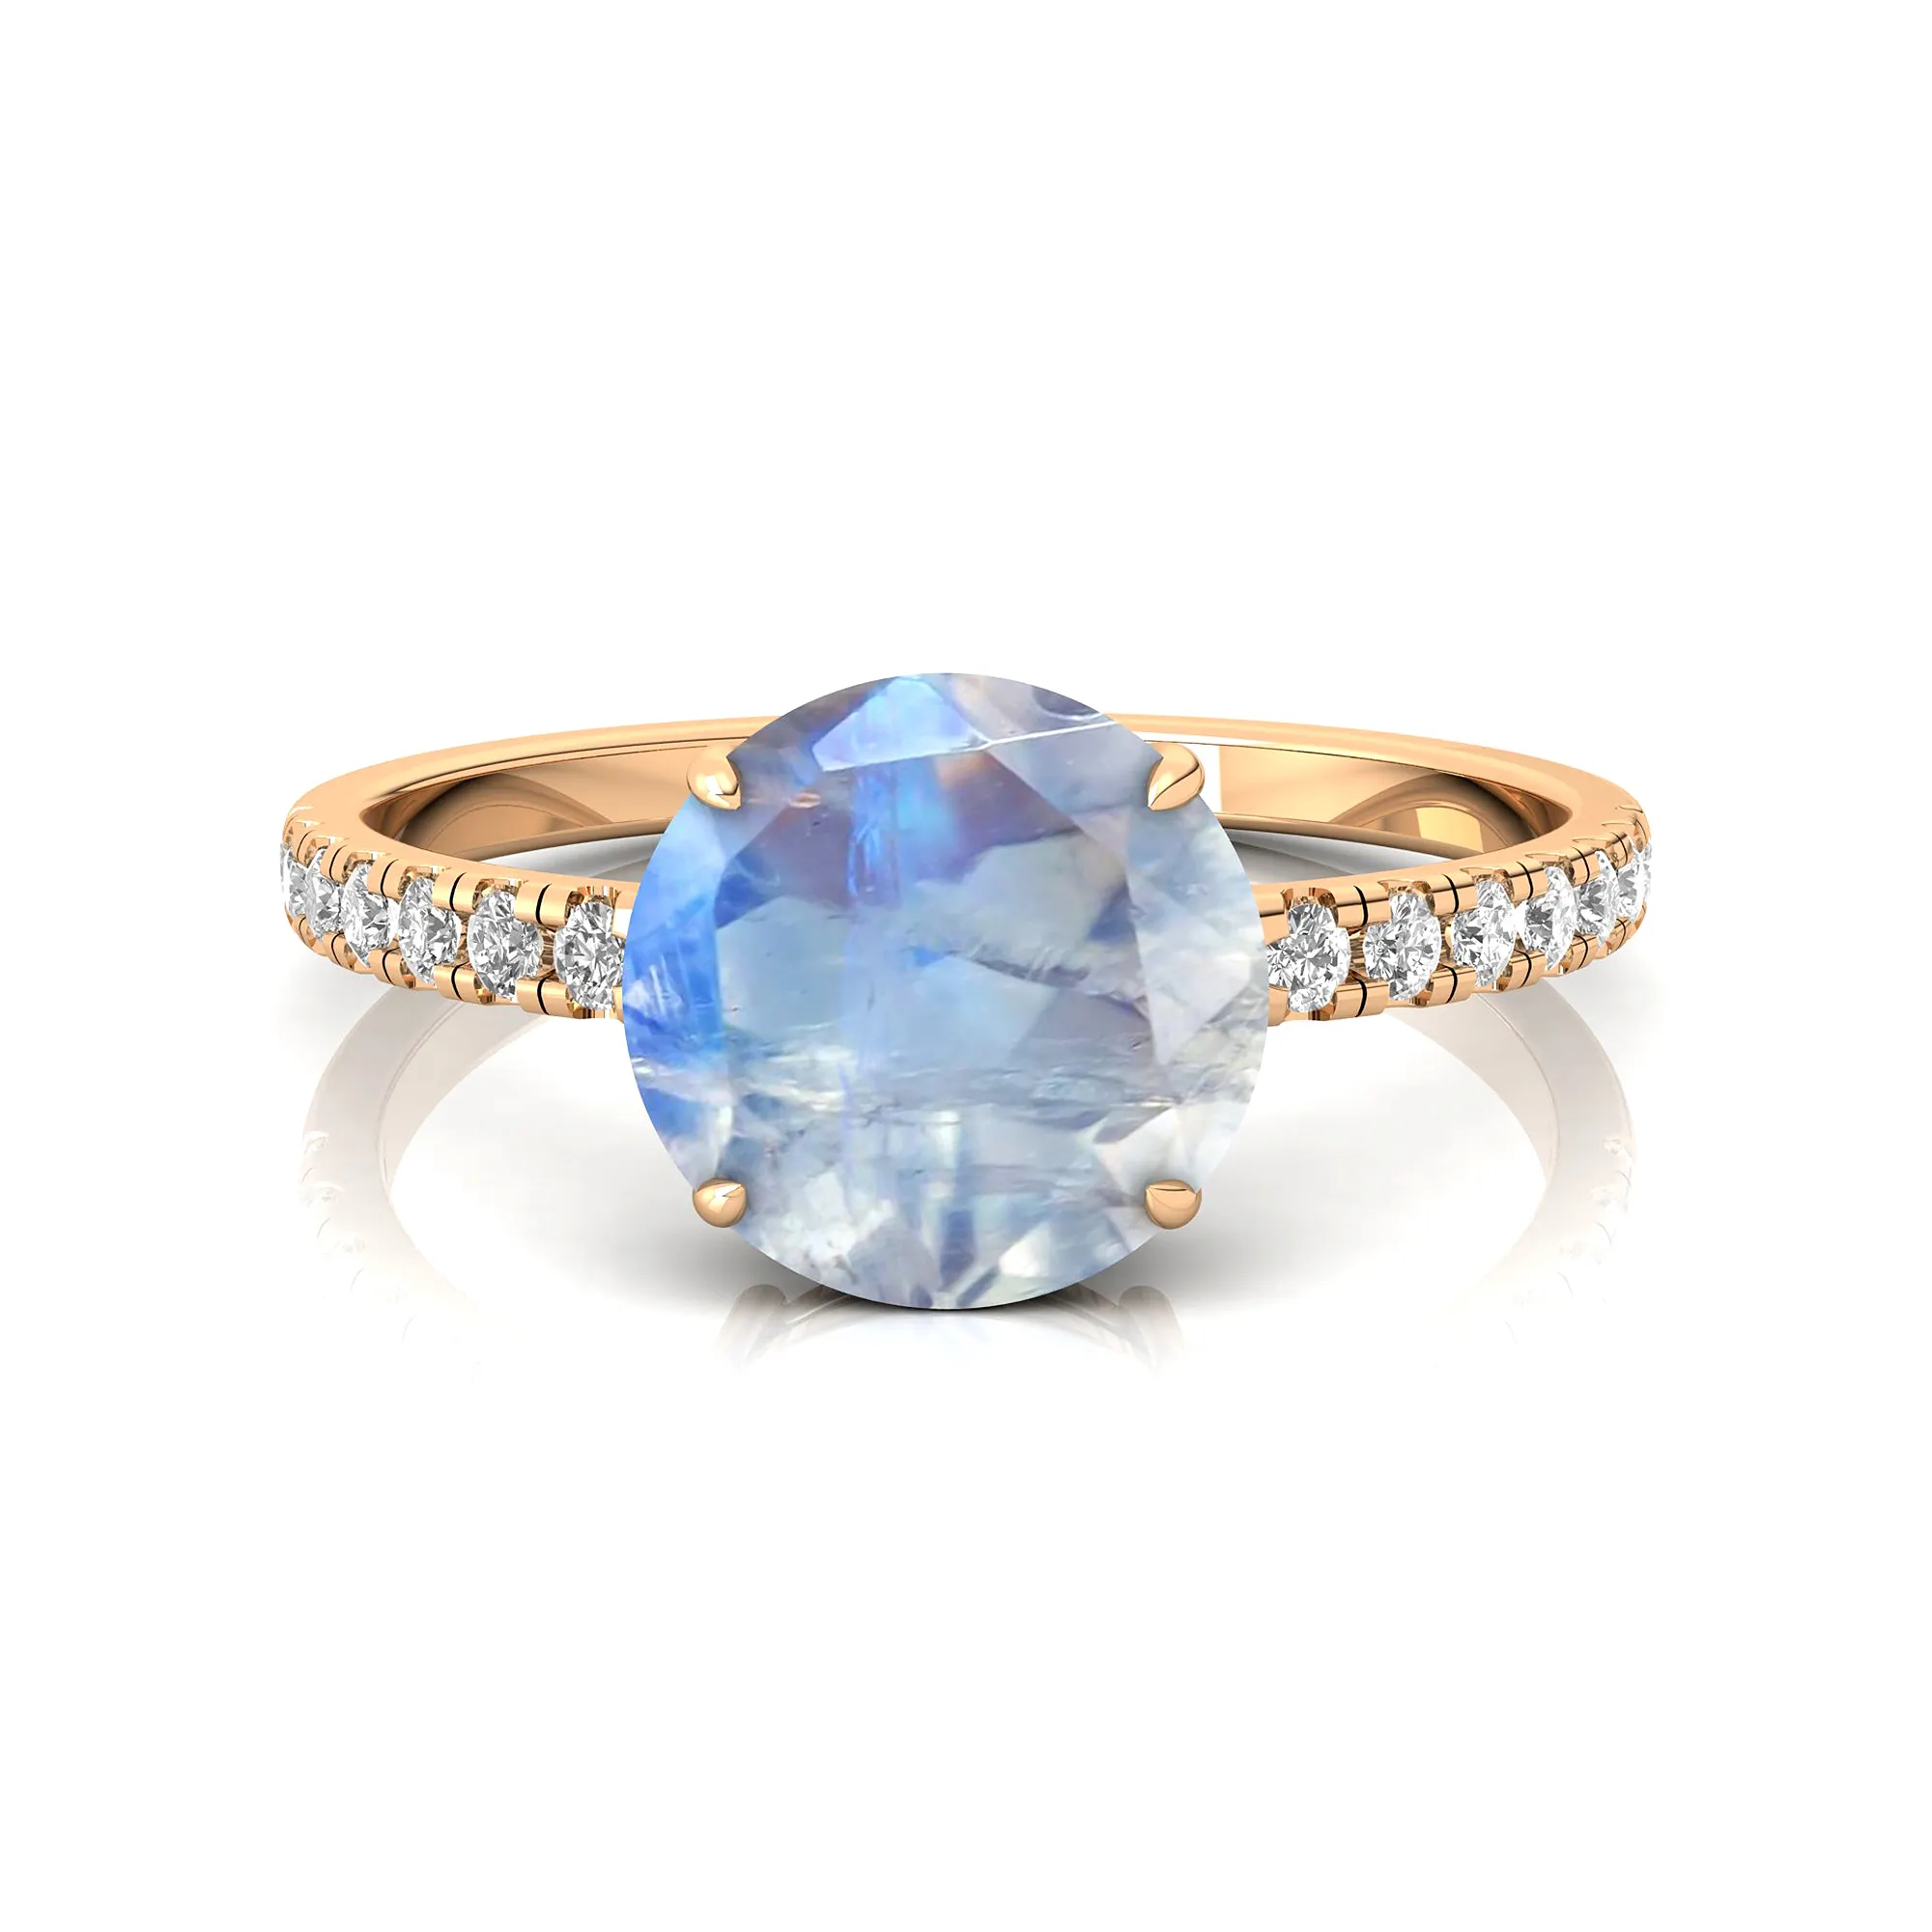 Classic Designer Round Faceted Cut Natural Rainbow Moonstone & White Solitaire Diamond Halo Solitaire Rings in 18K Solid Gold